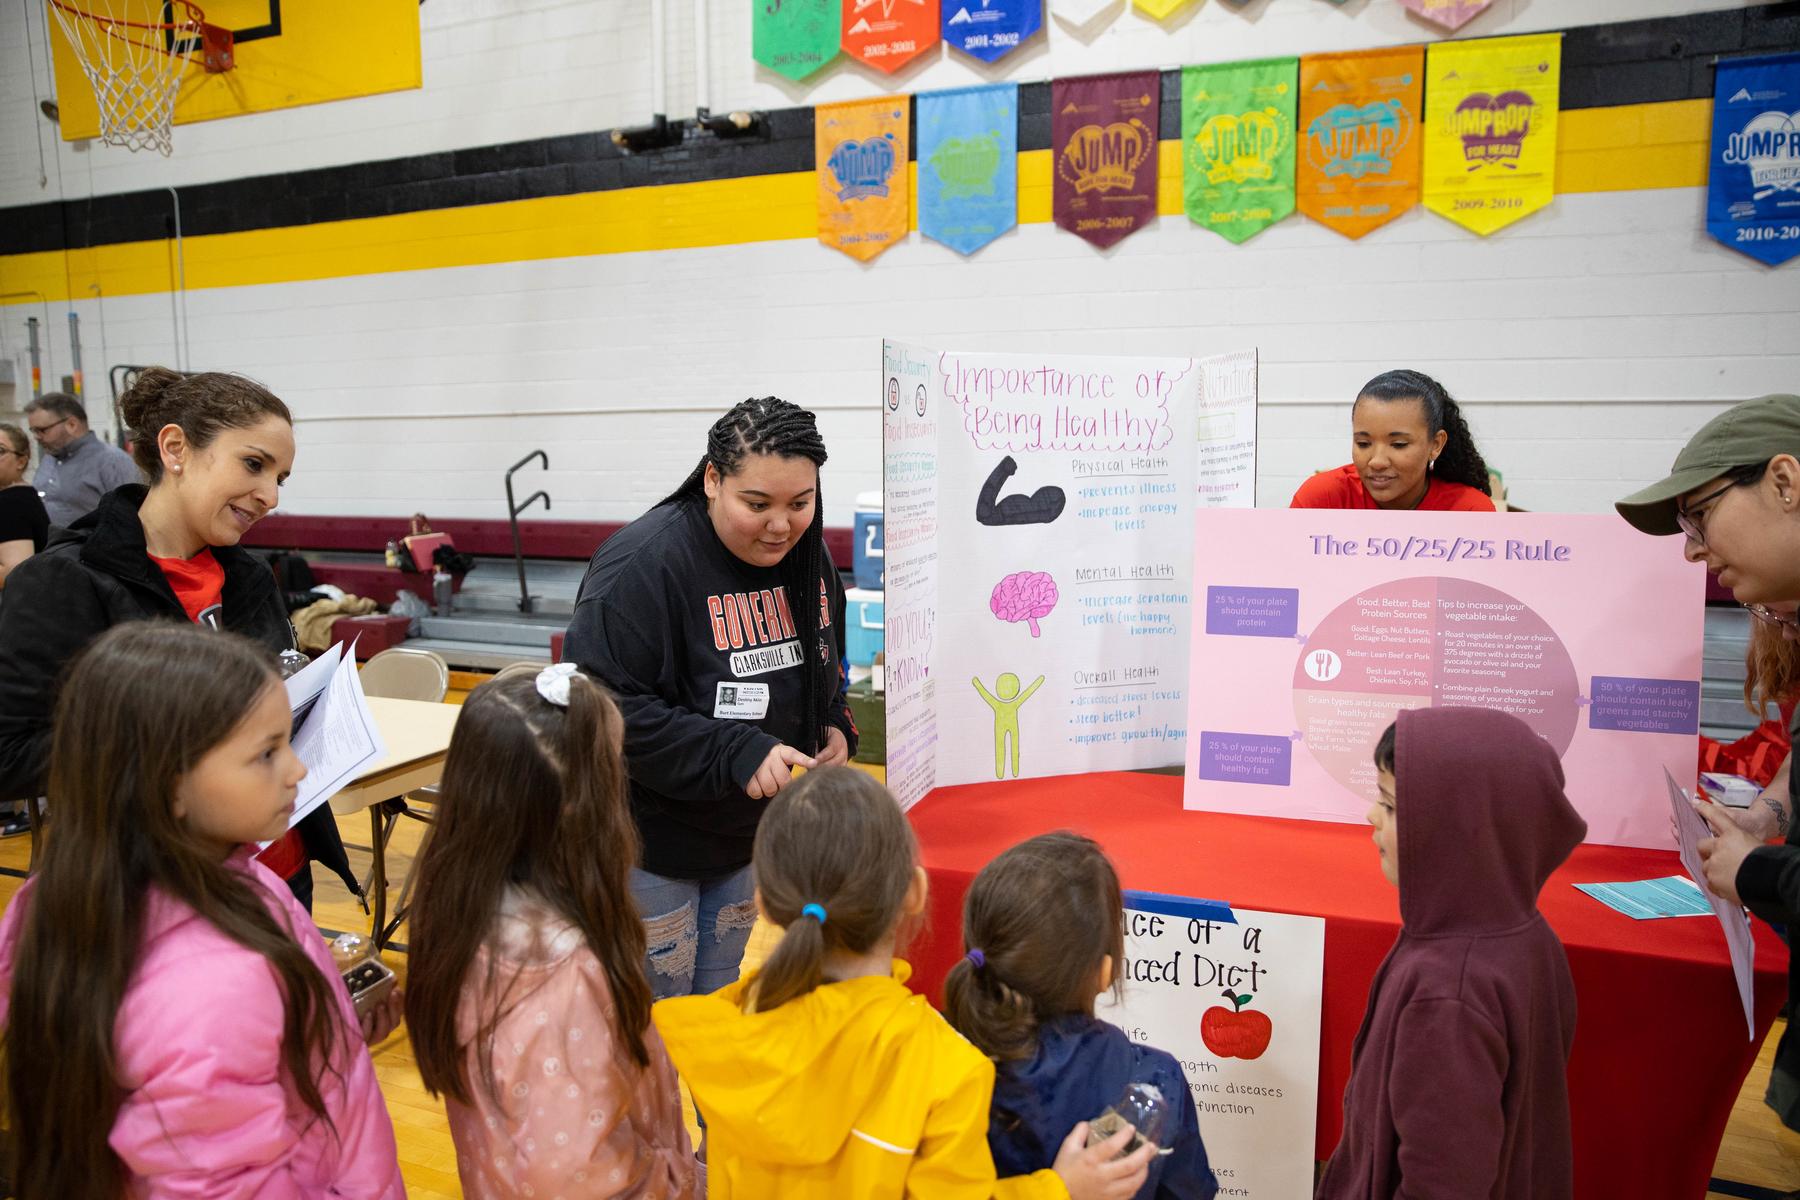 Students and faculty from Austin Peay State University's Master of Public Health (MPH) program speak with children at Burt Elementary School on the importance of being healthy.